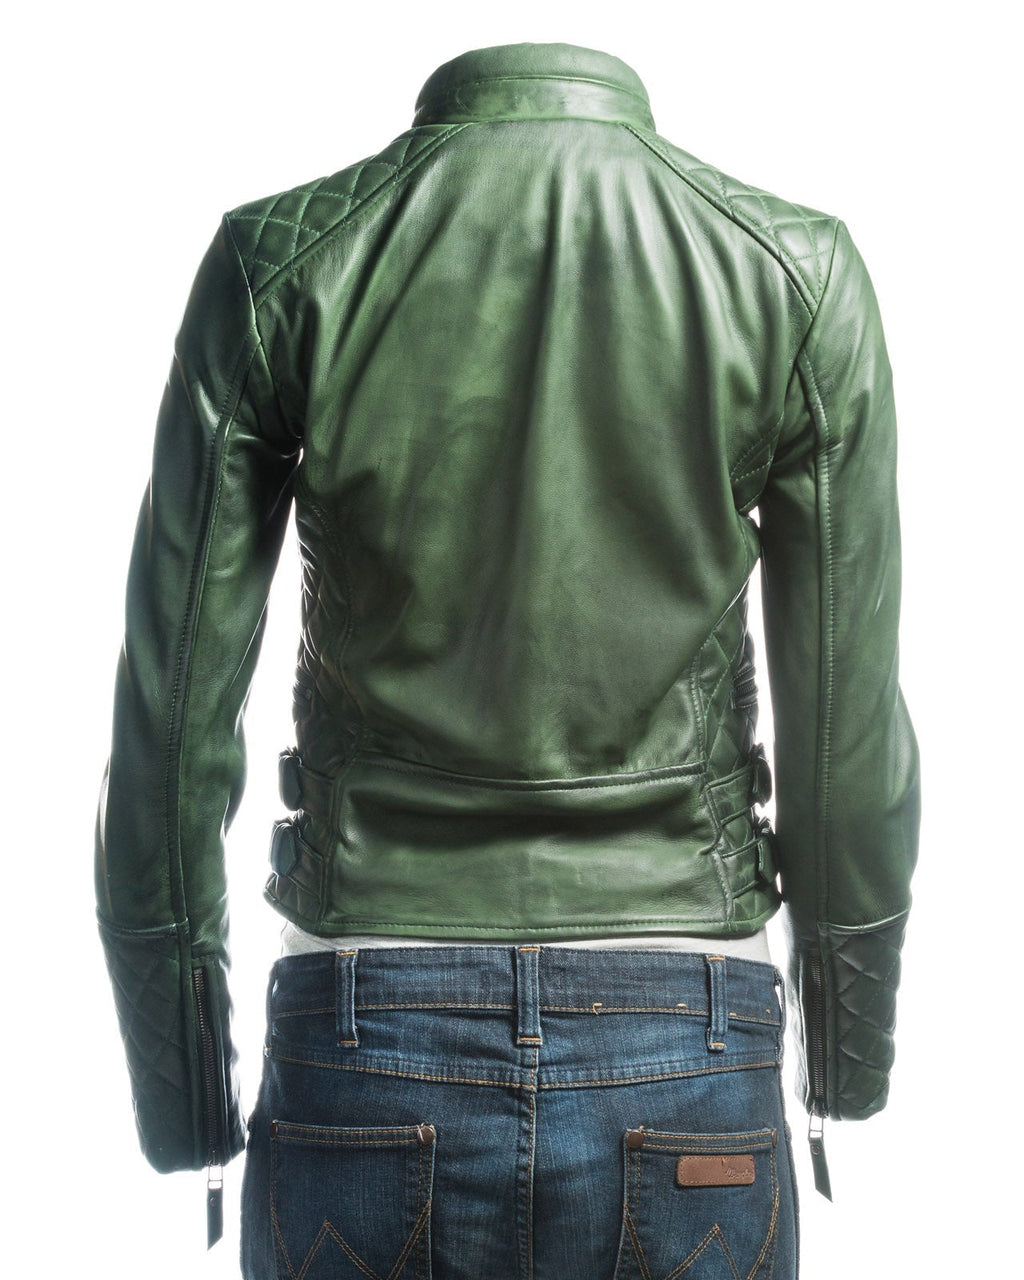 Ladies Green Slim Fit Diamond Quilted Biker Style Leather Jacket With Detachable Hood: Flora